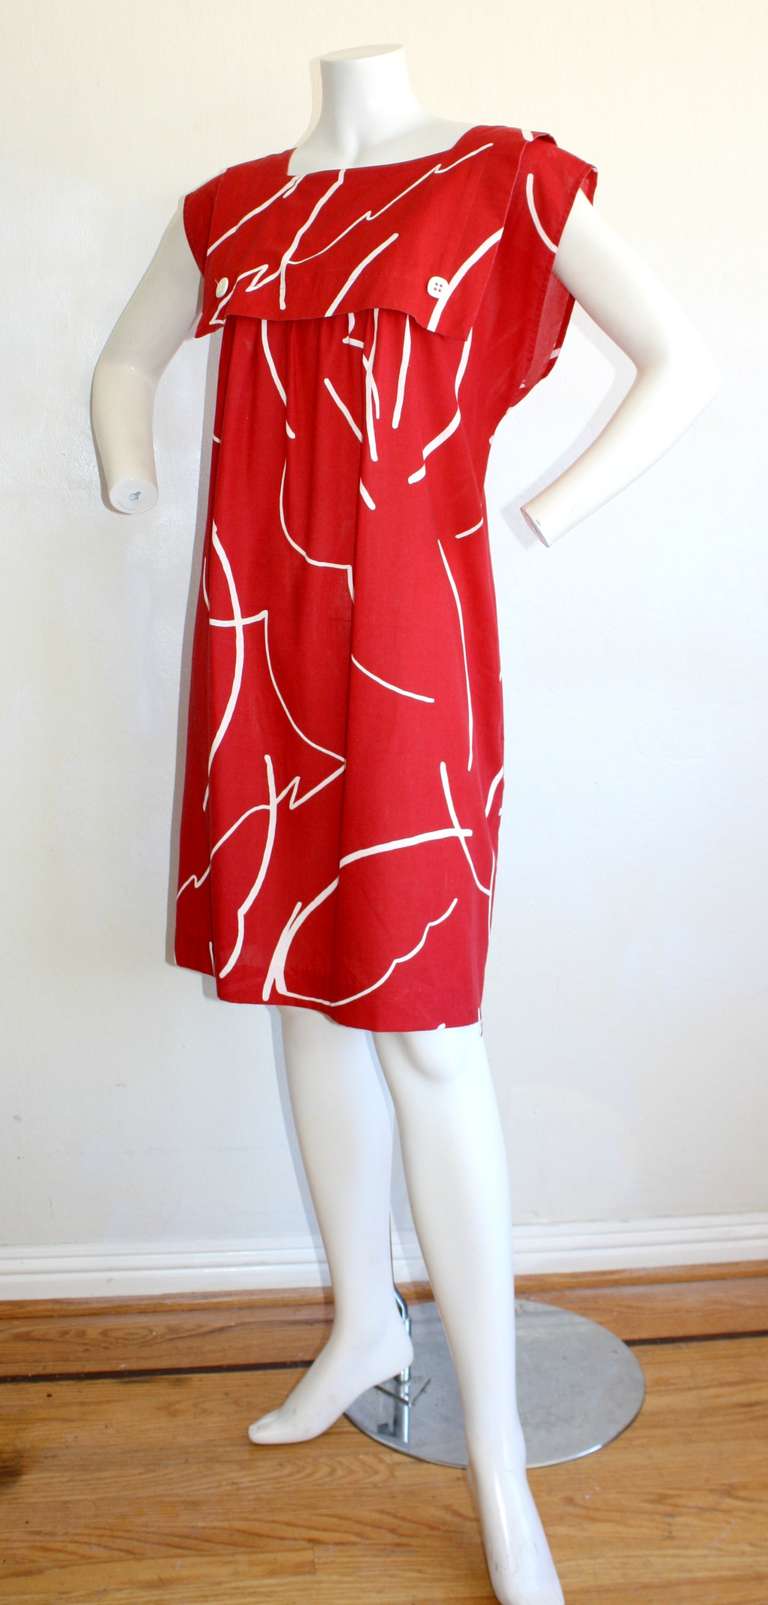 Bill Tice Hand Painted Vintage Red Cotton Graffiti Abstract Empire Dress For Sale 1